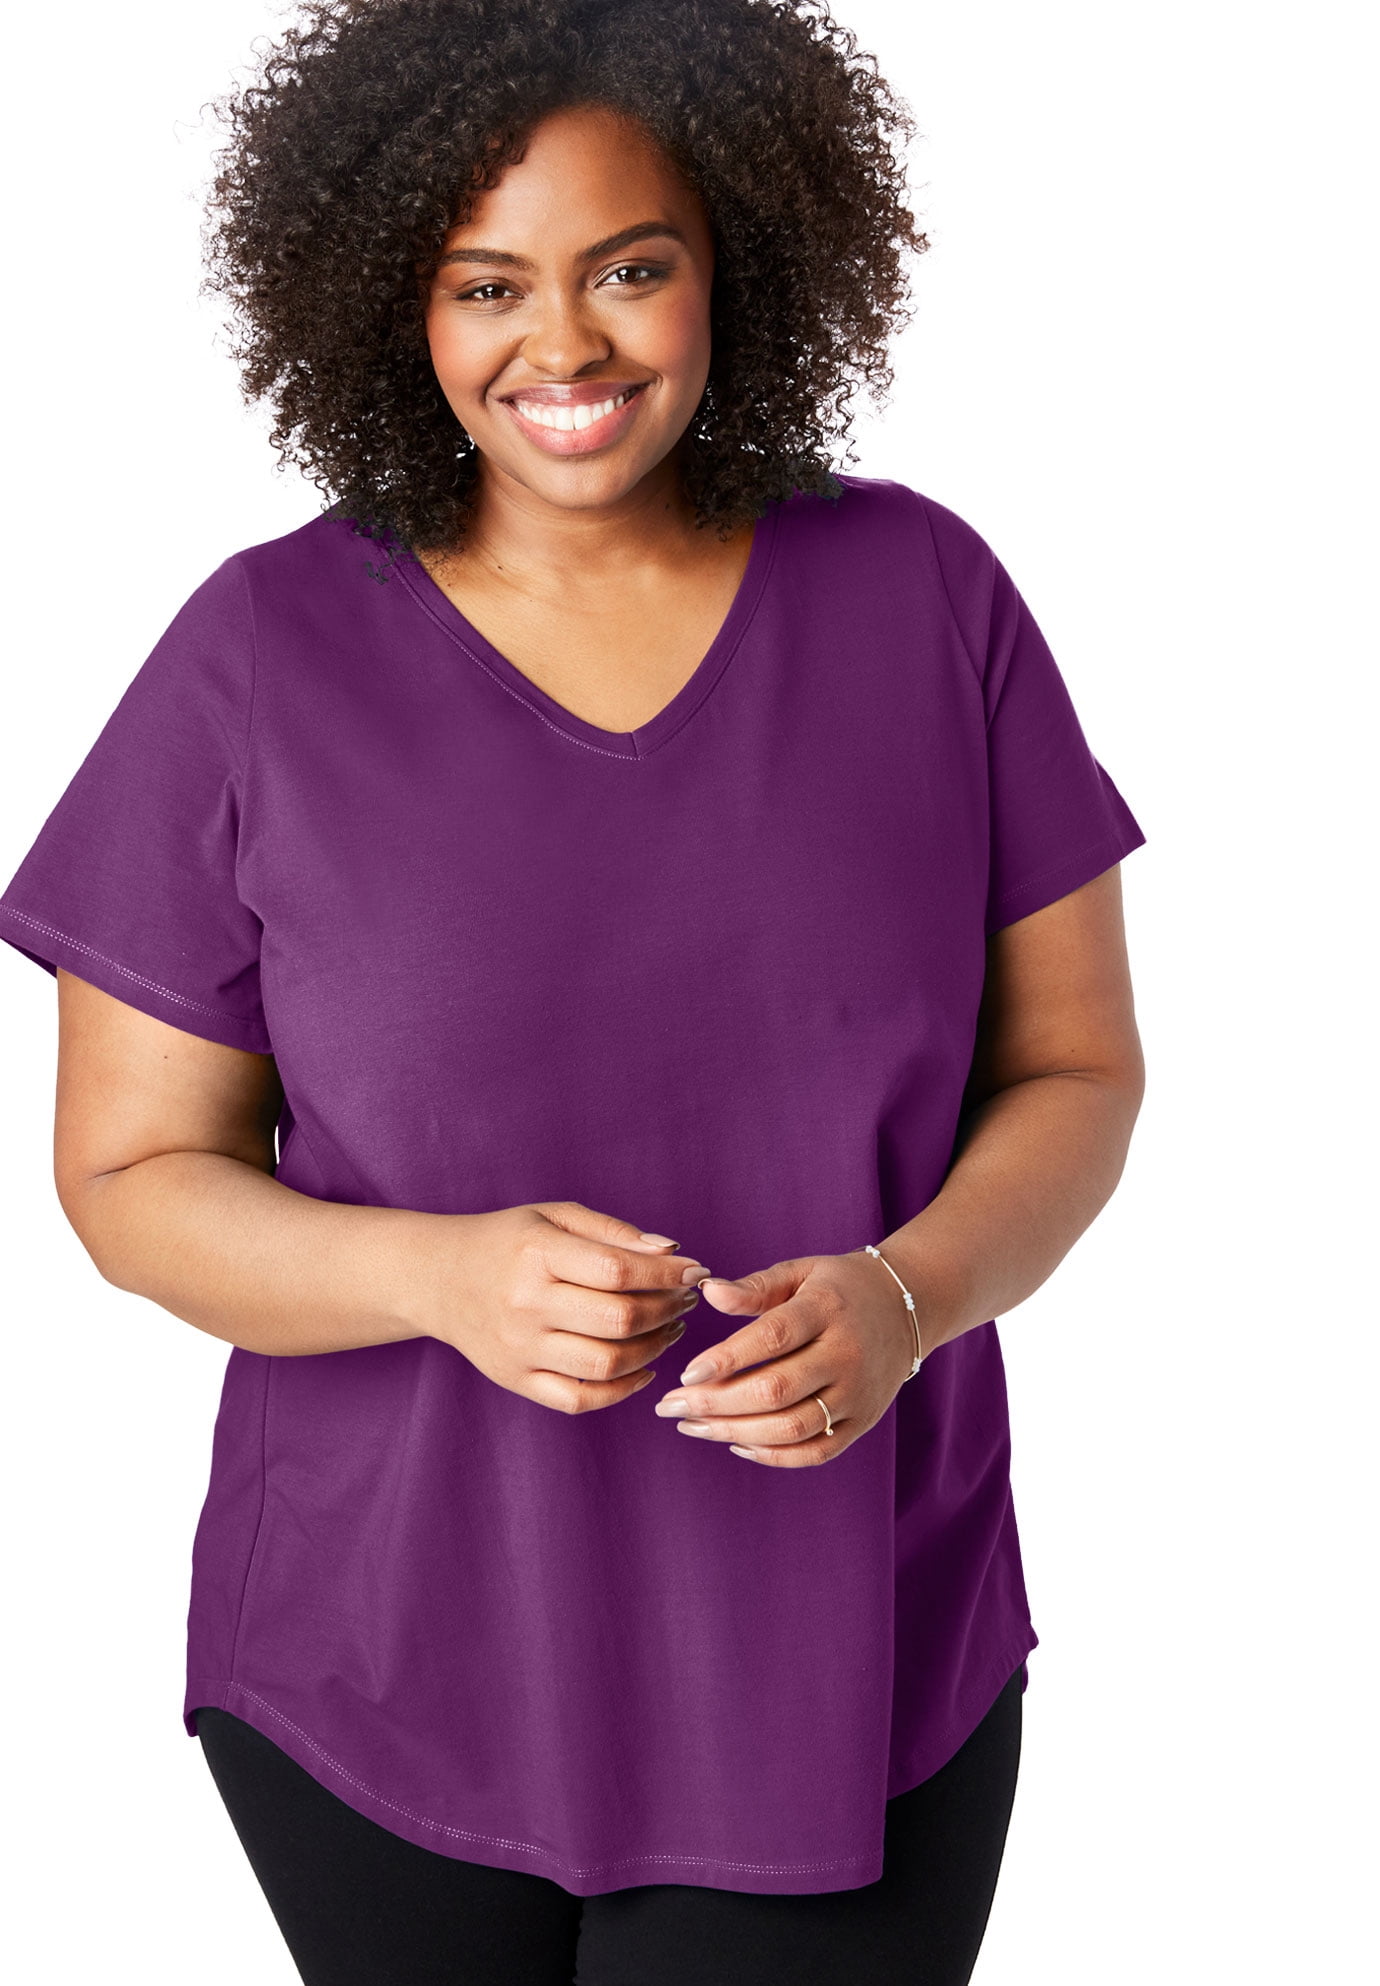 Woman Within Womens Plus Size Everywear Essentials V-Neck Tee